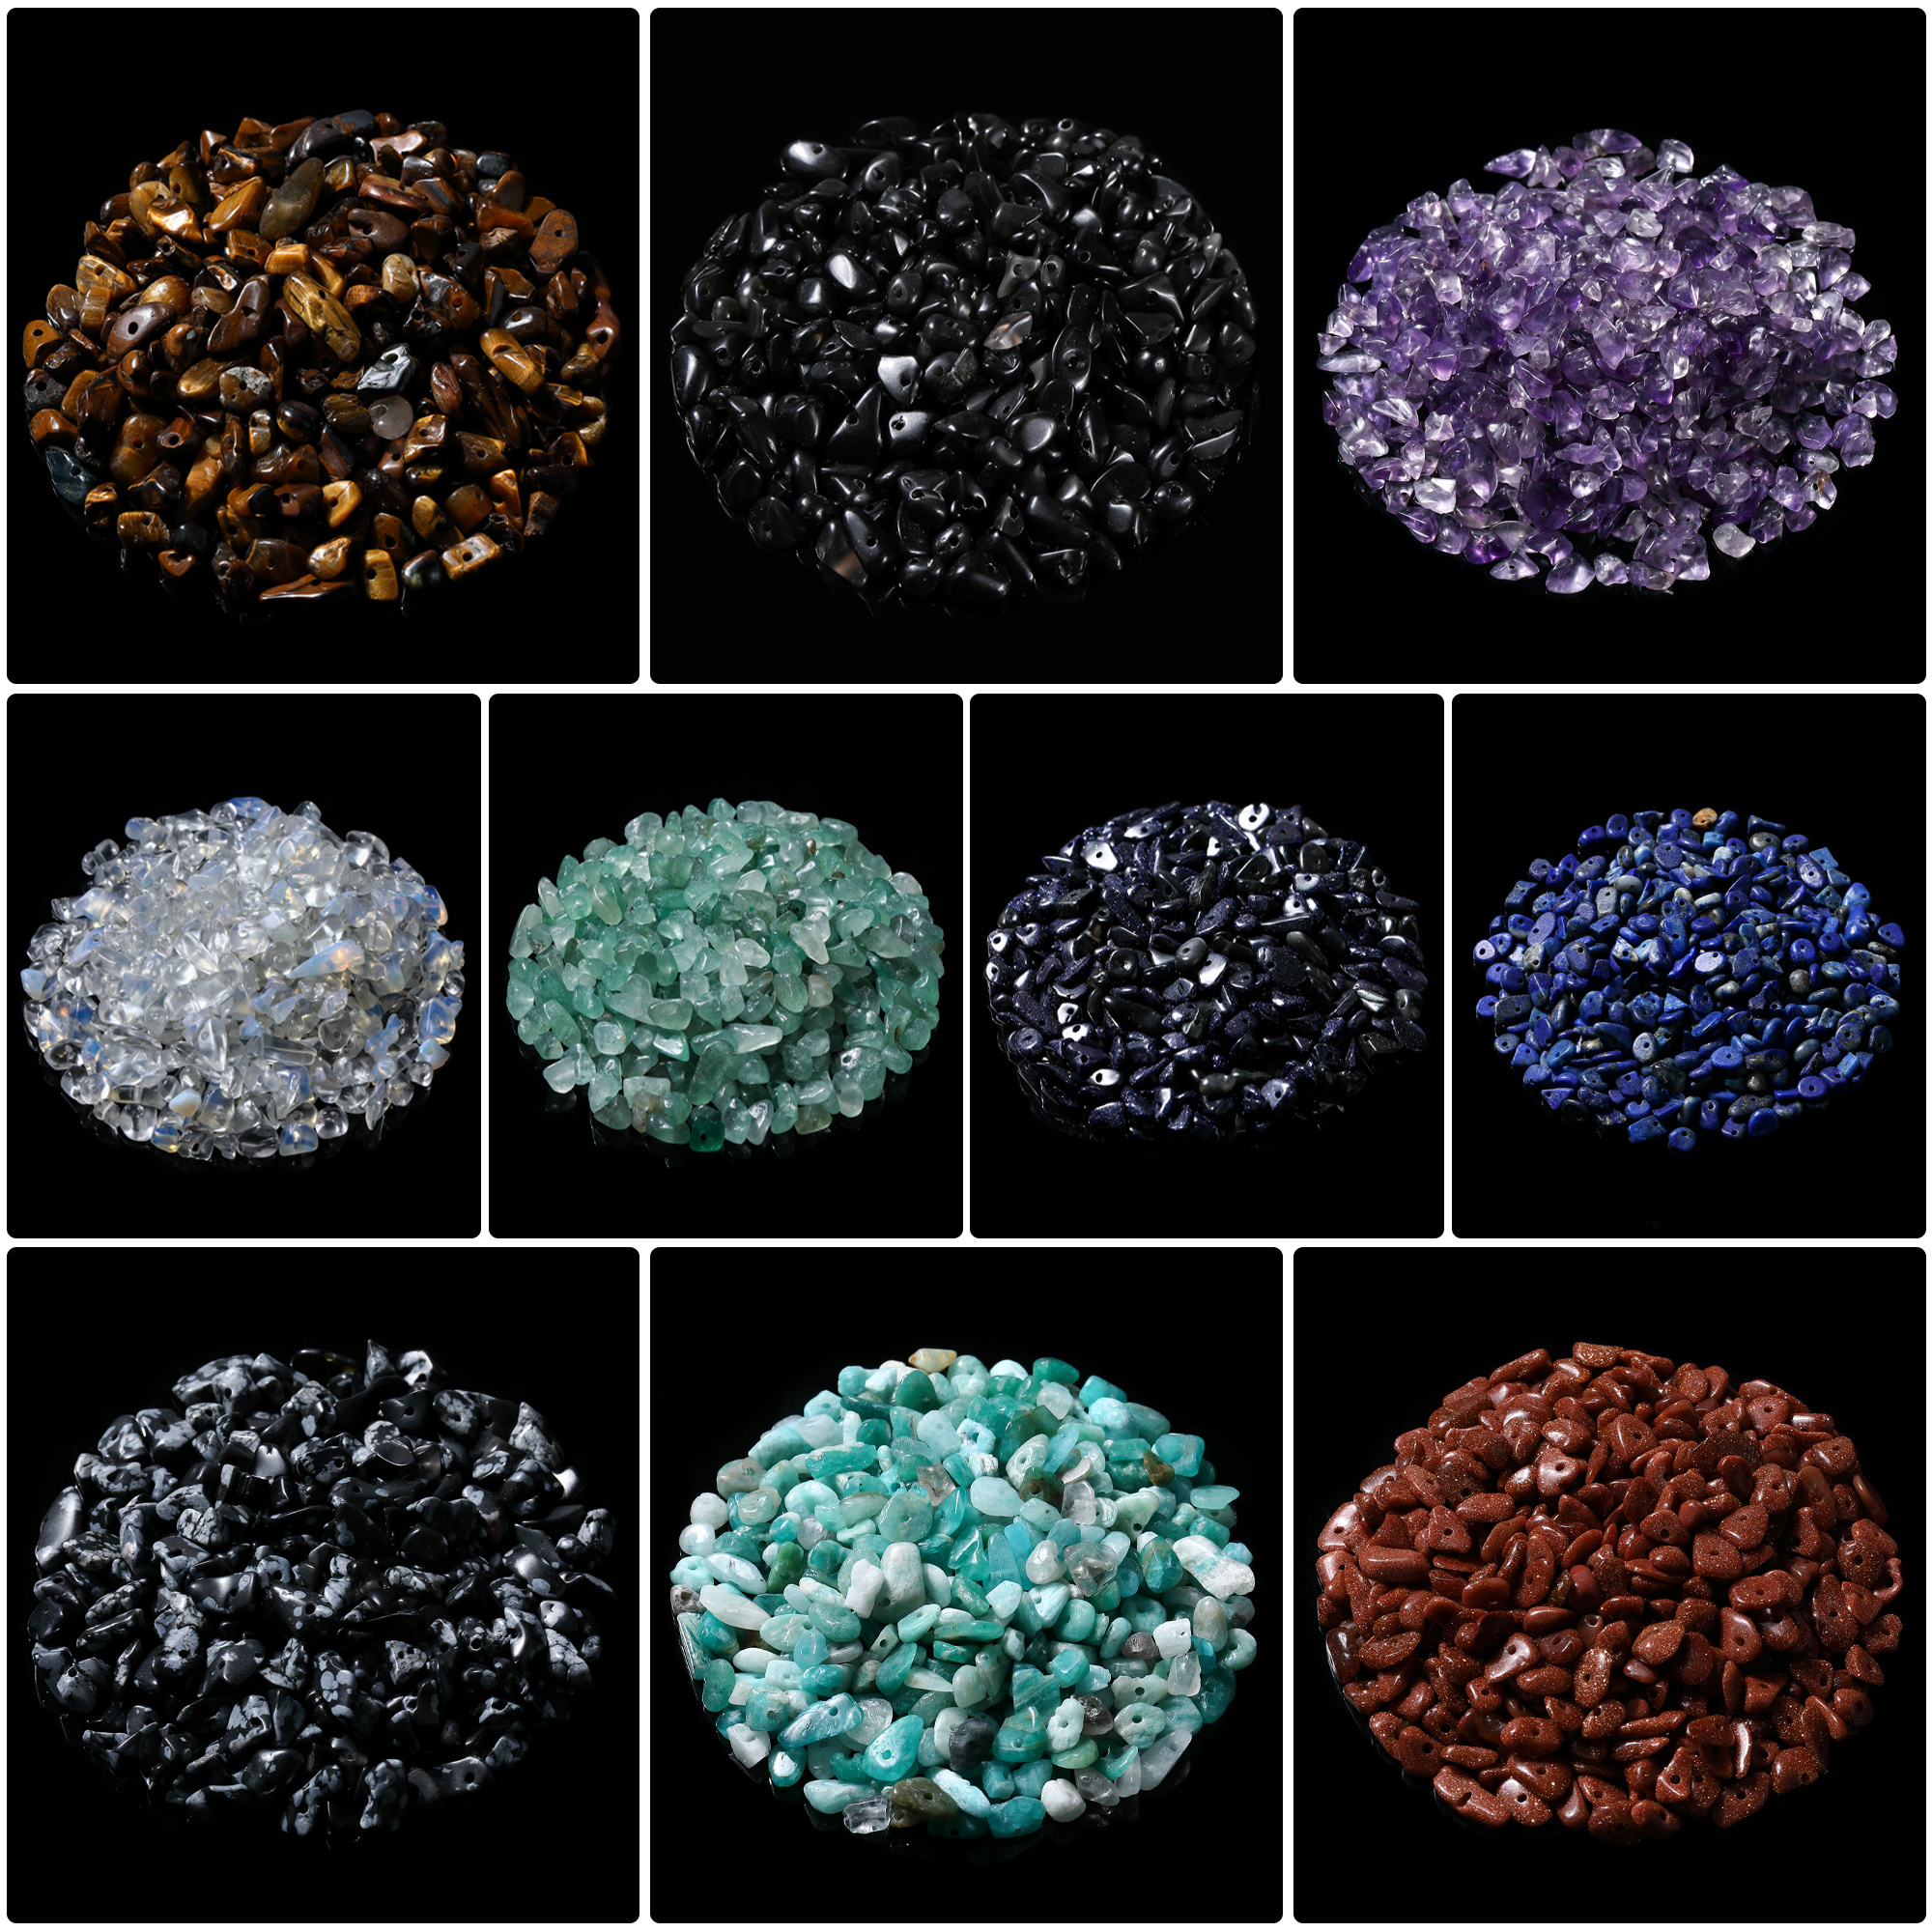 JESOT Gemstones for Jewelry Making, 1126PCS Rock Beads with